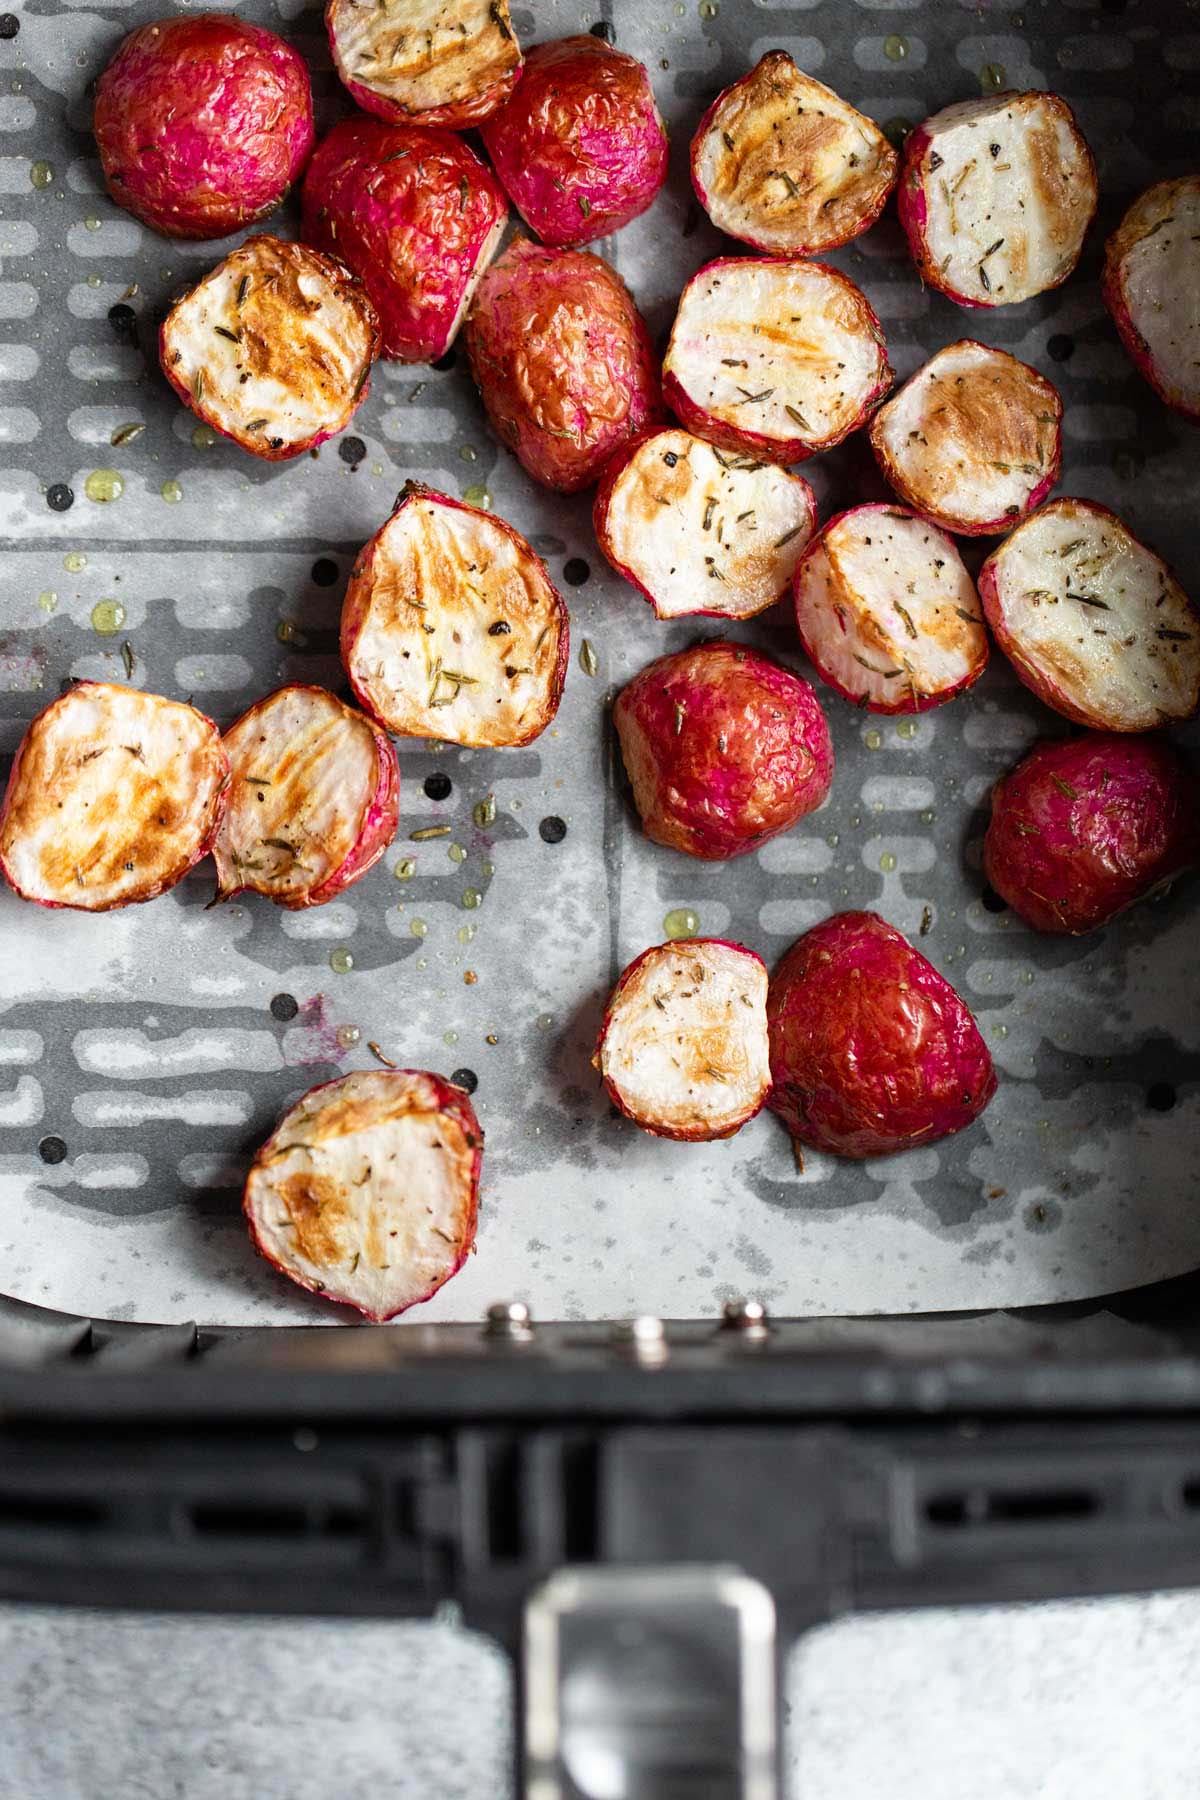 Roasted radishes in air fryer basket.